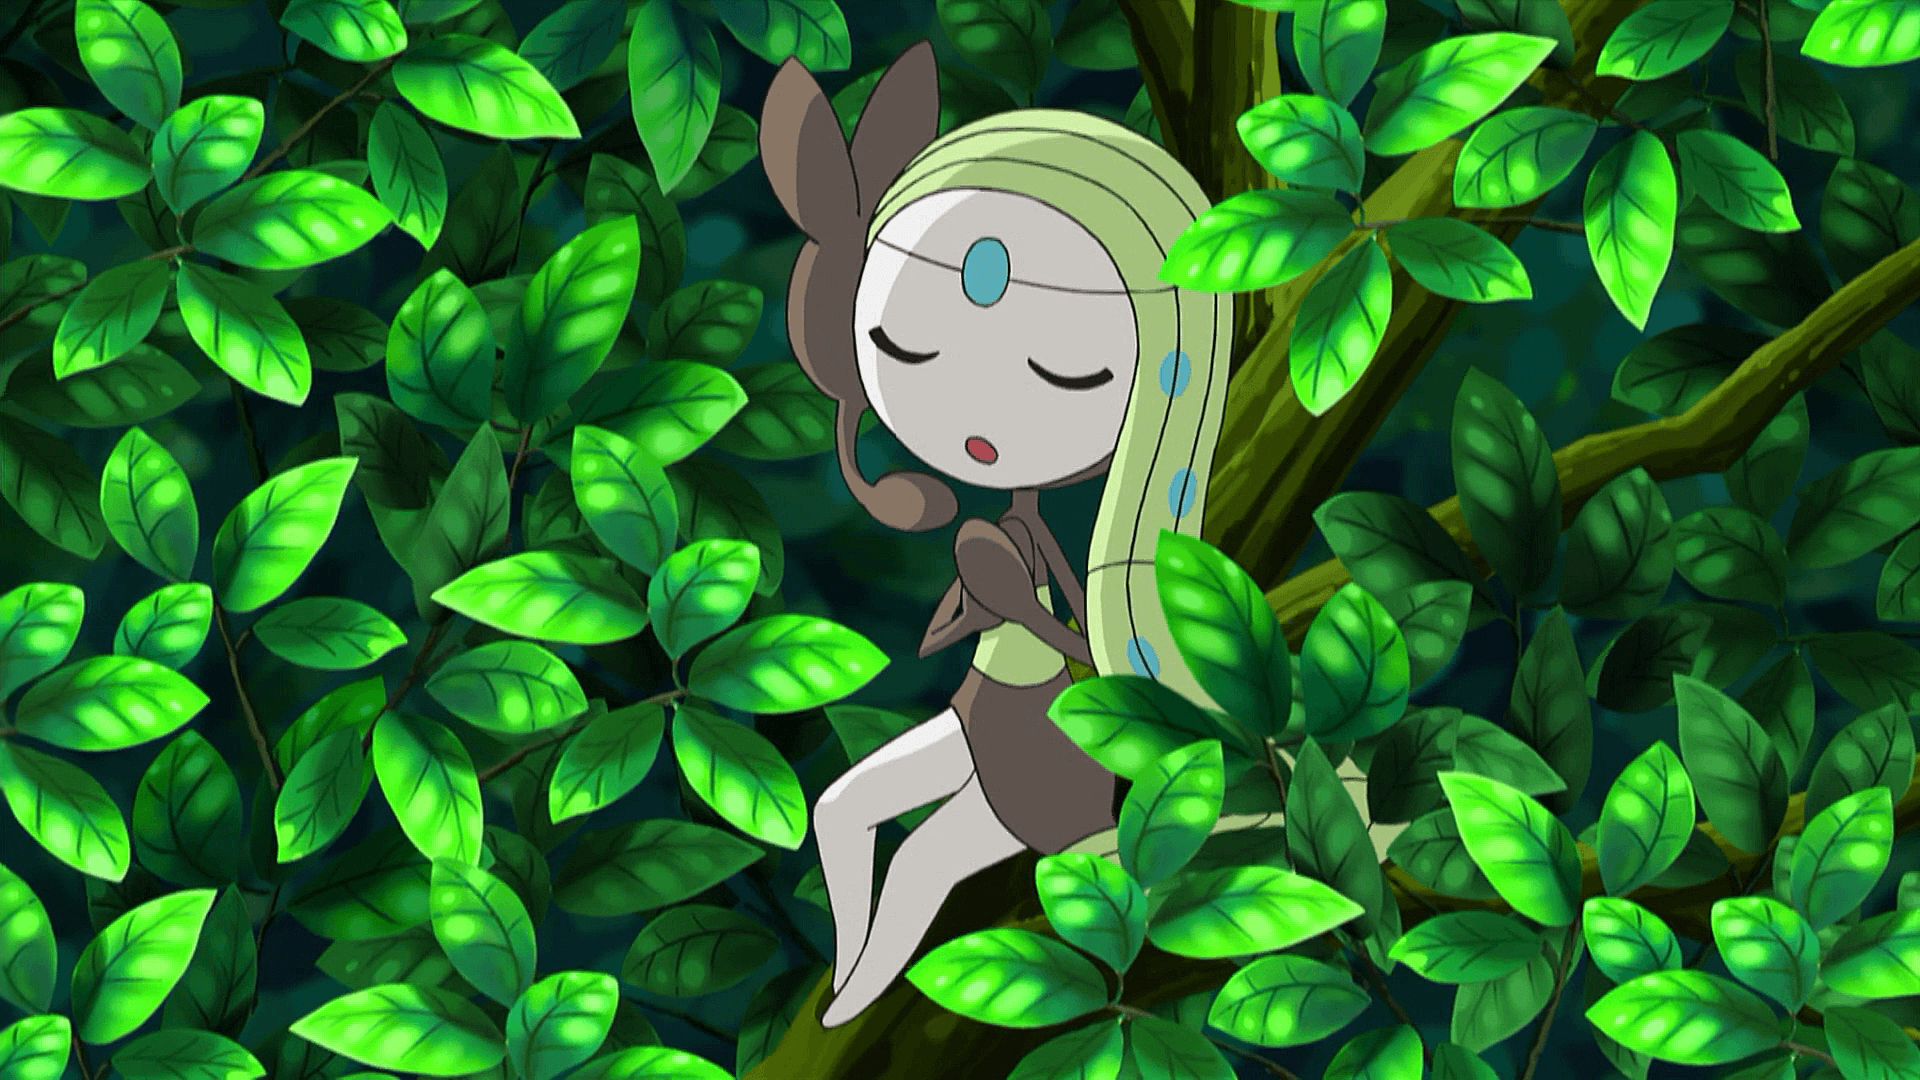 BW087: All for the Love of Meloetta!. Pokémon